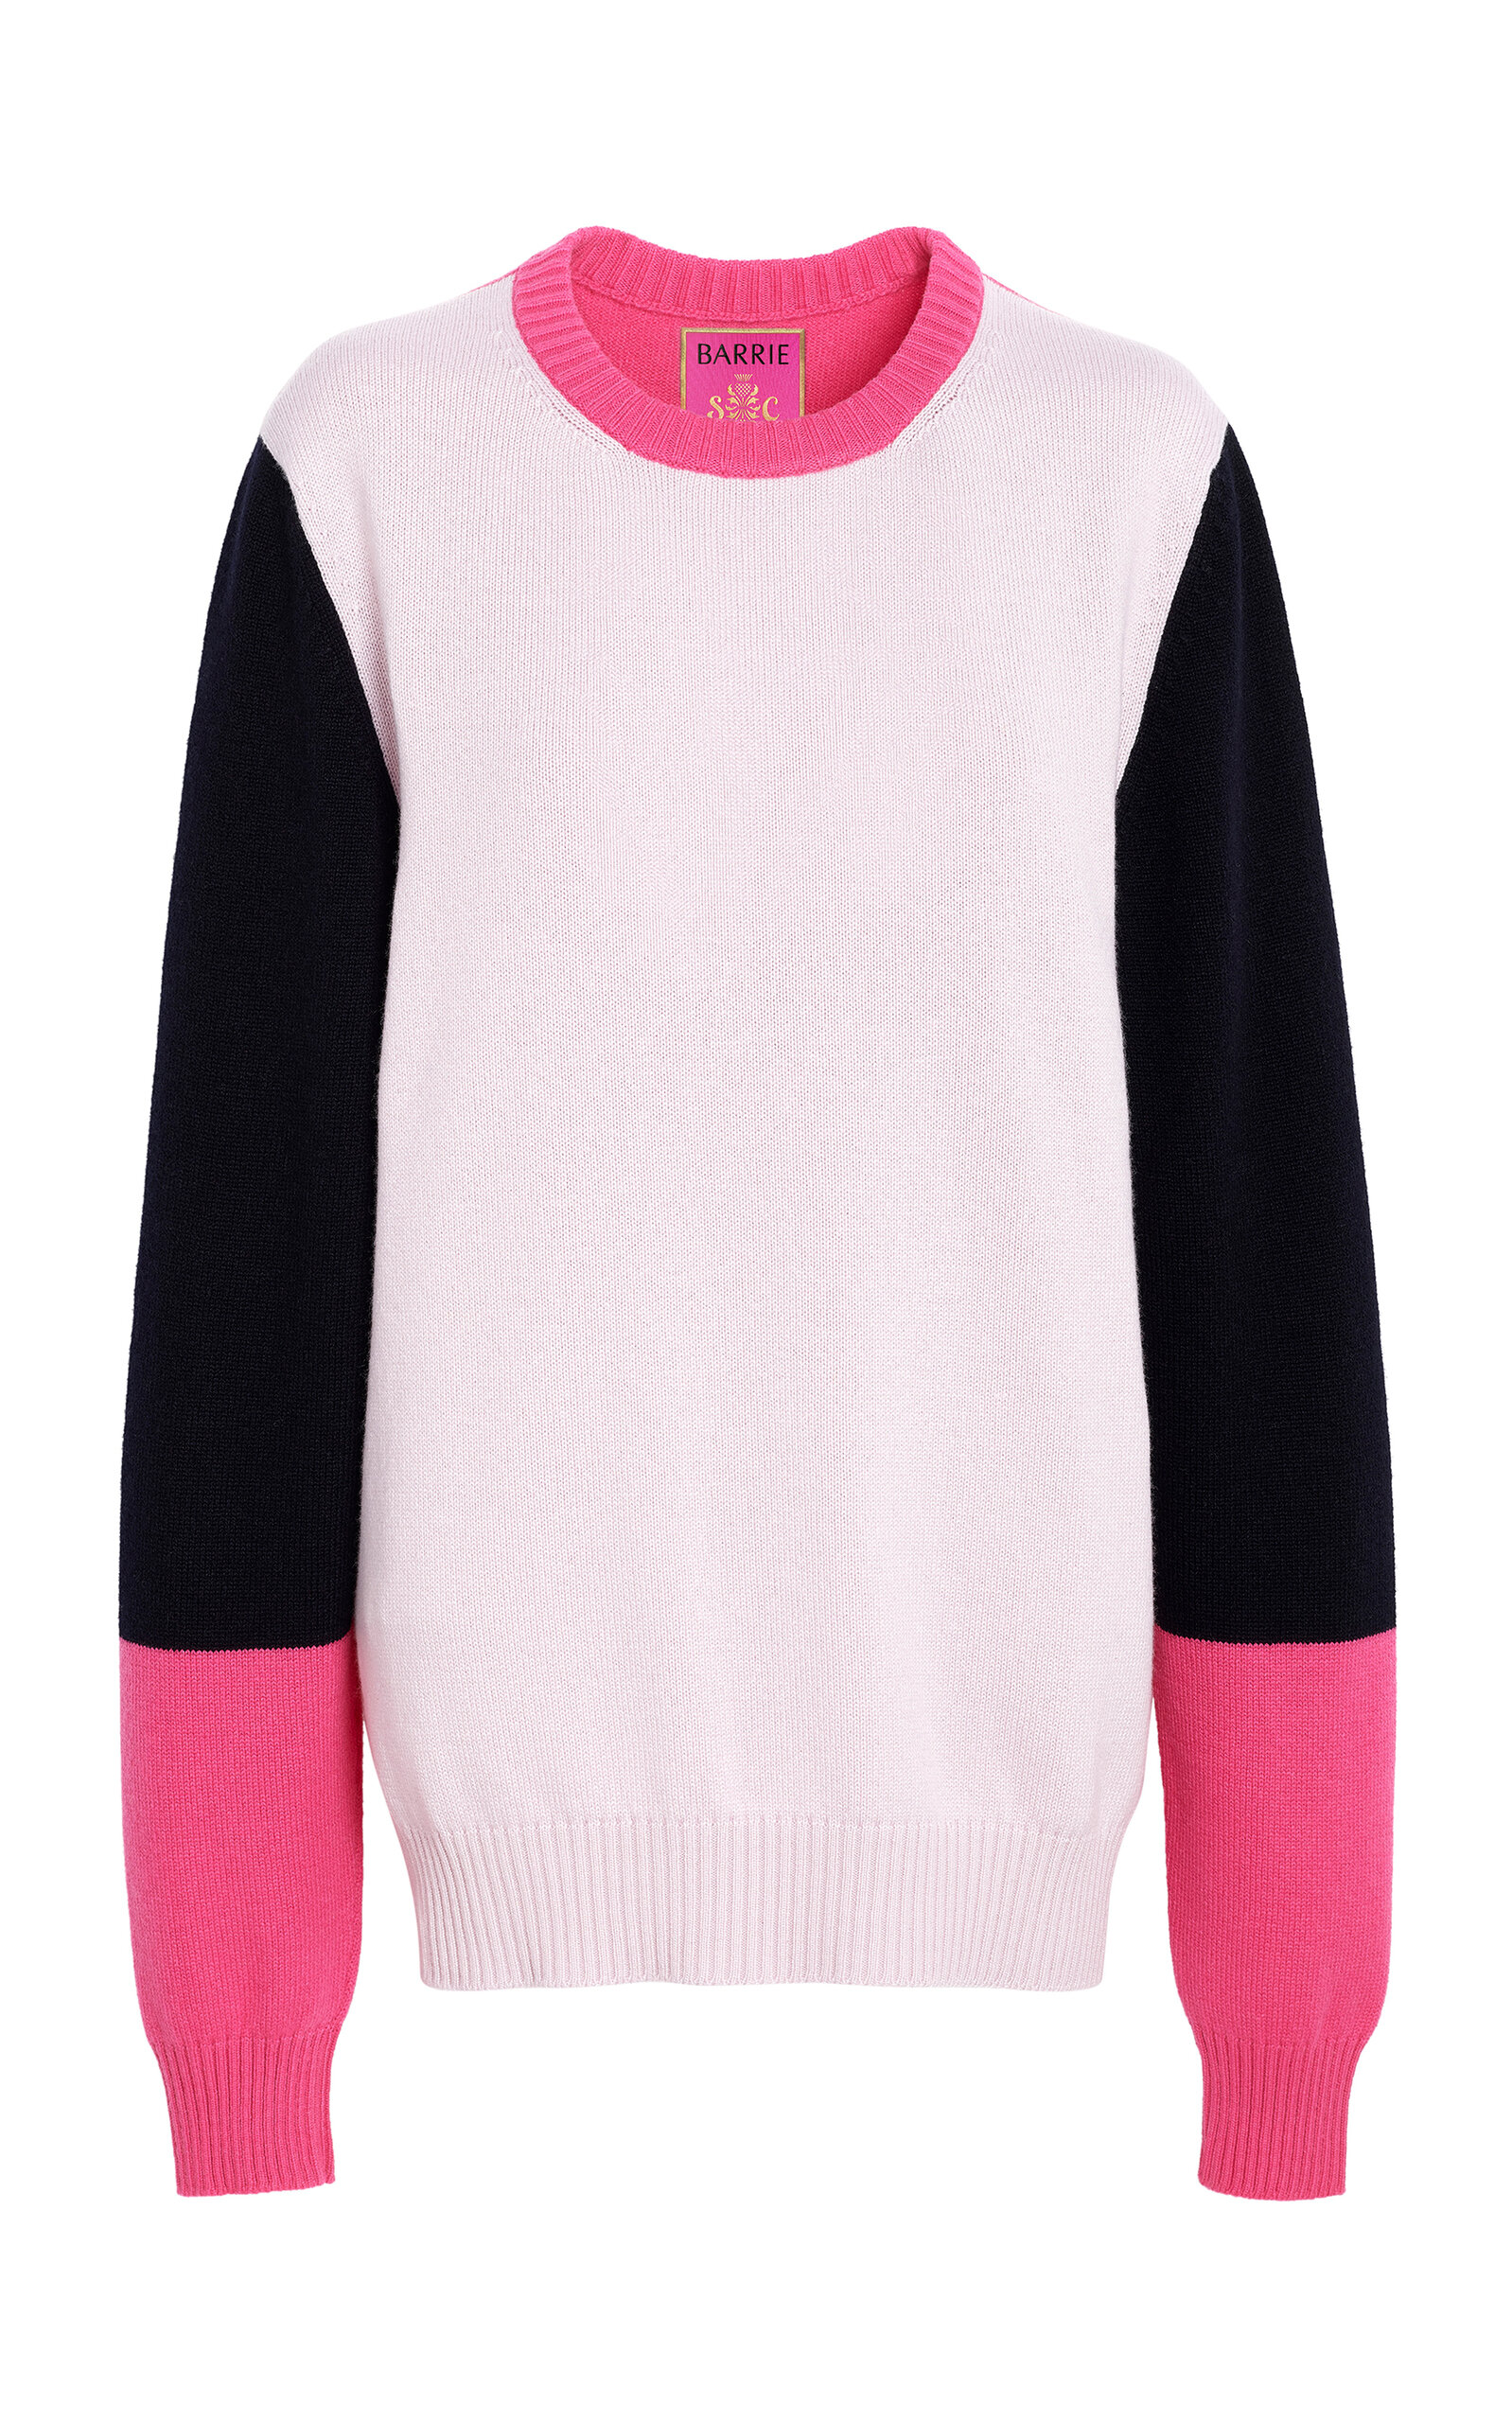 BARRIE BARRIE X SOFIA COPPOLA COLOR-BLOCKED CASHMERE SWEATER